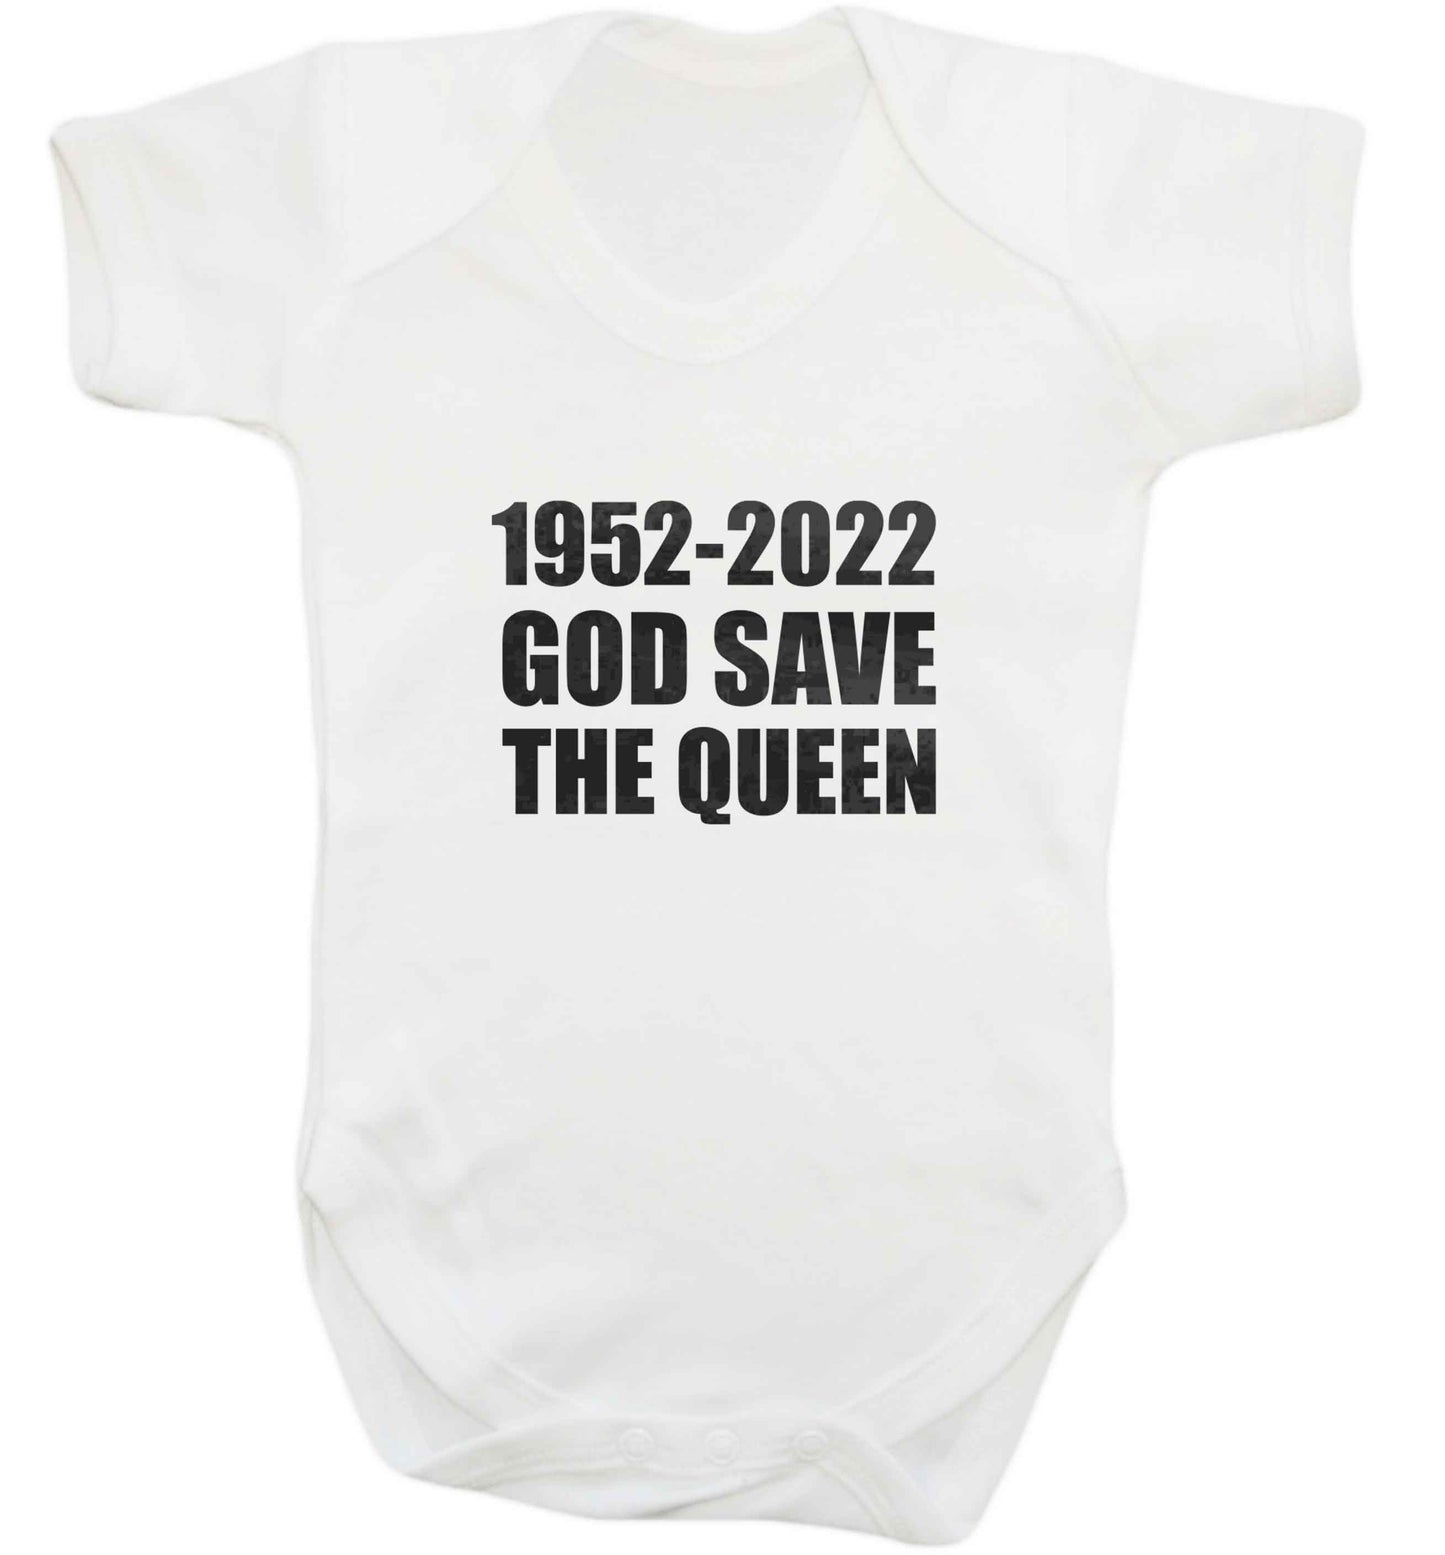 God save the queen baby vest white 18-24 months